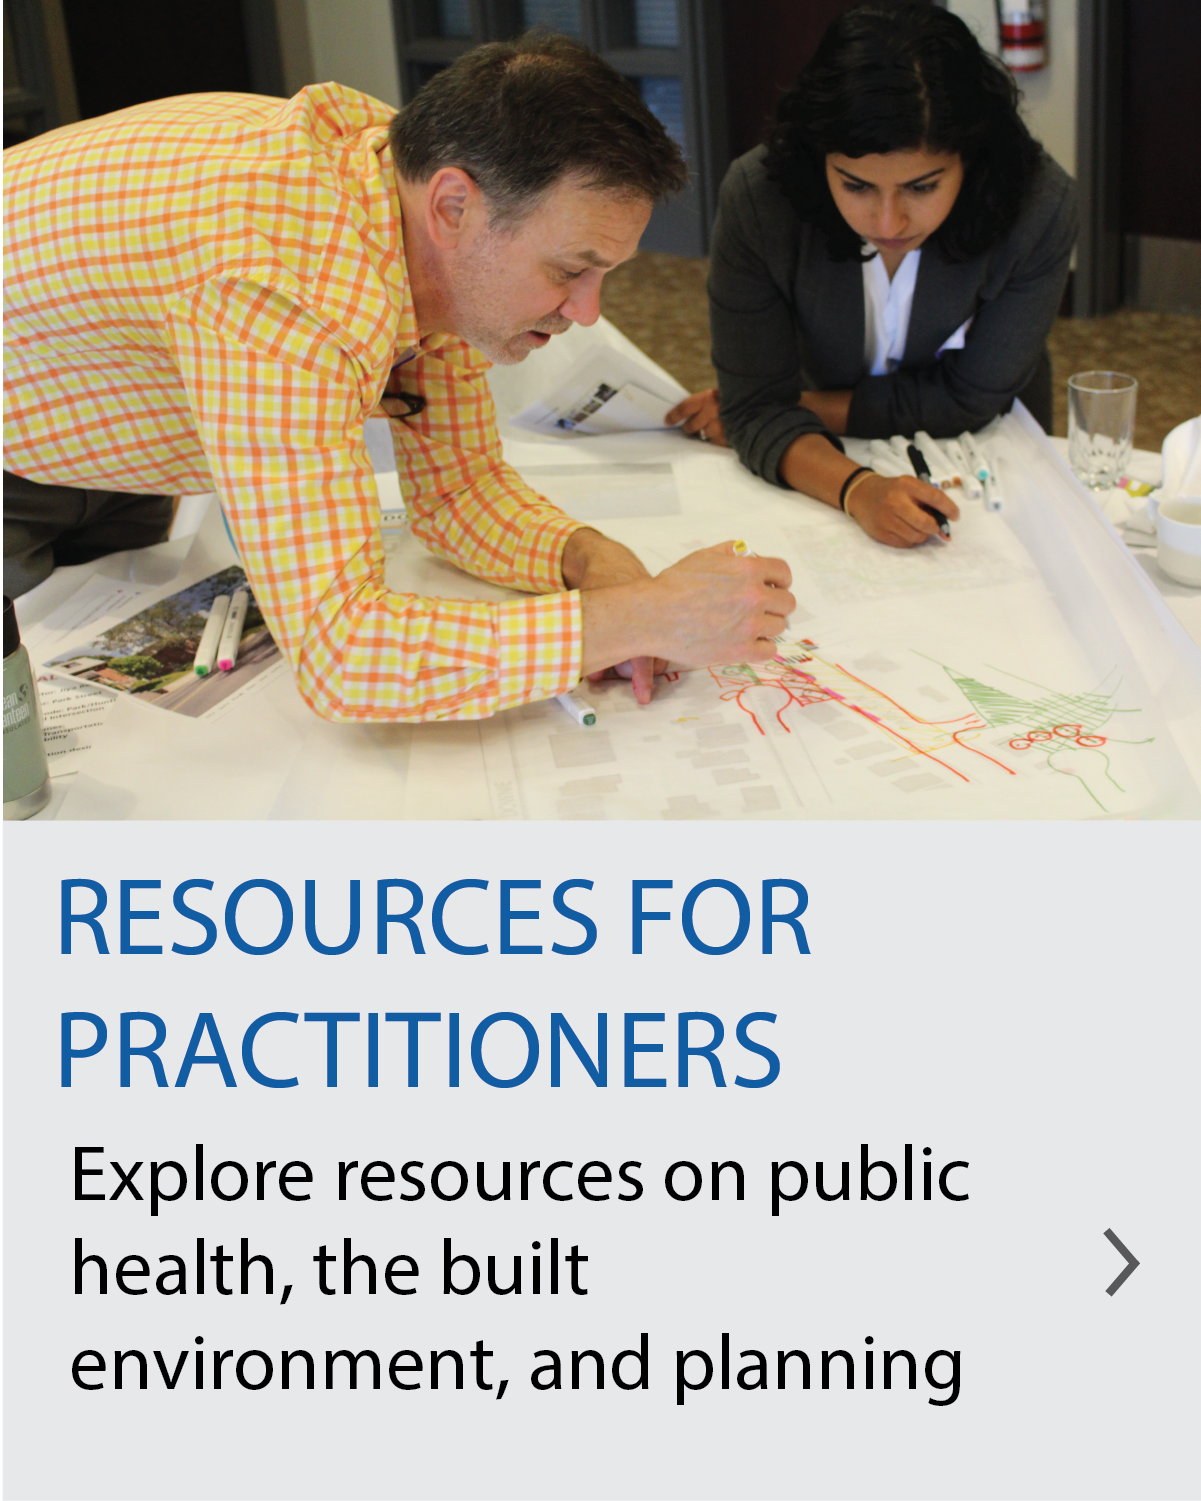 Resources for Practitioners: Explore resources on public health, the built environment, and planning